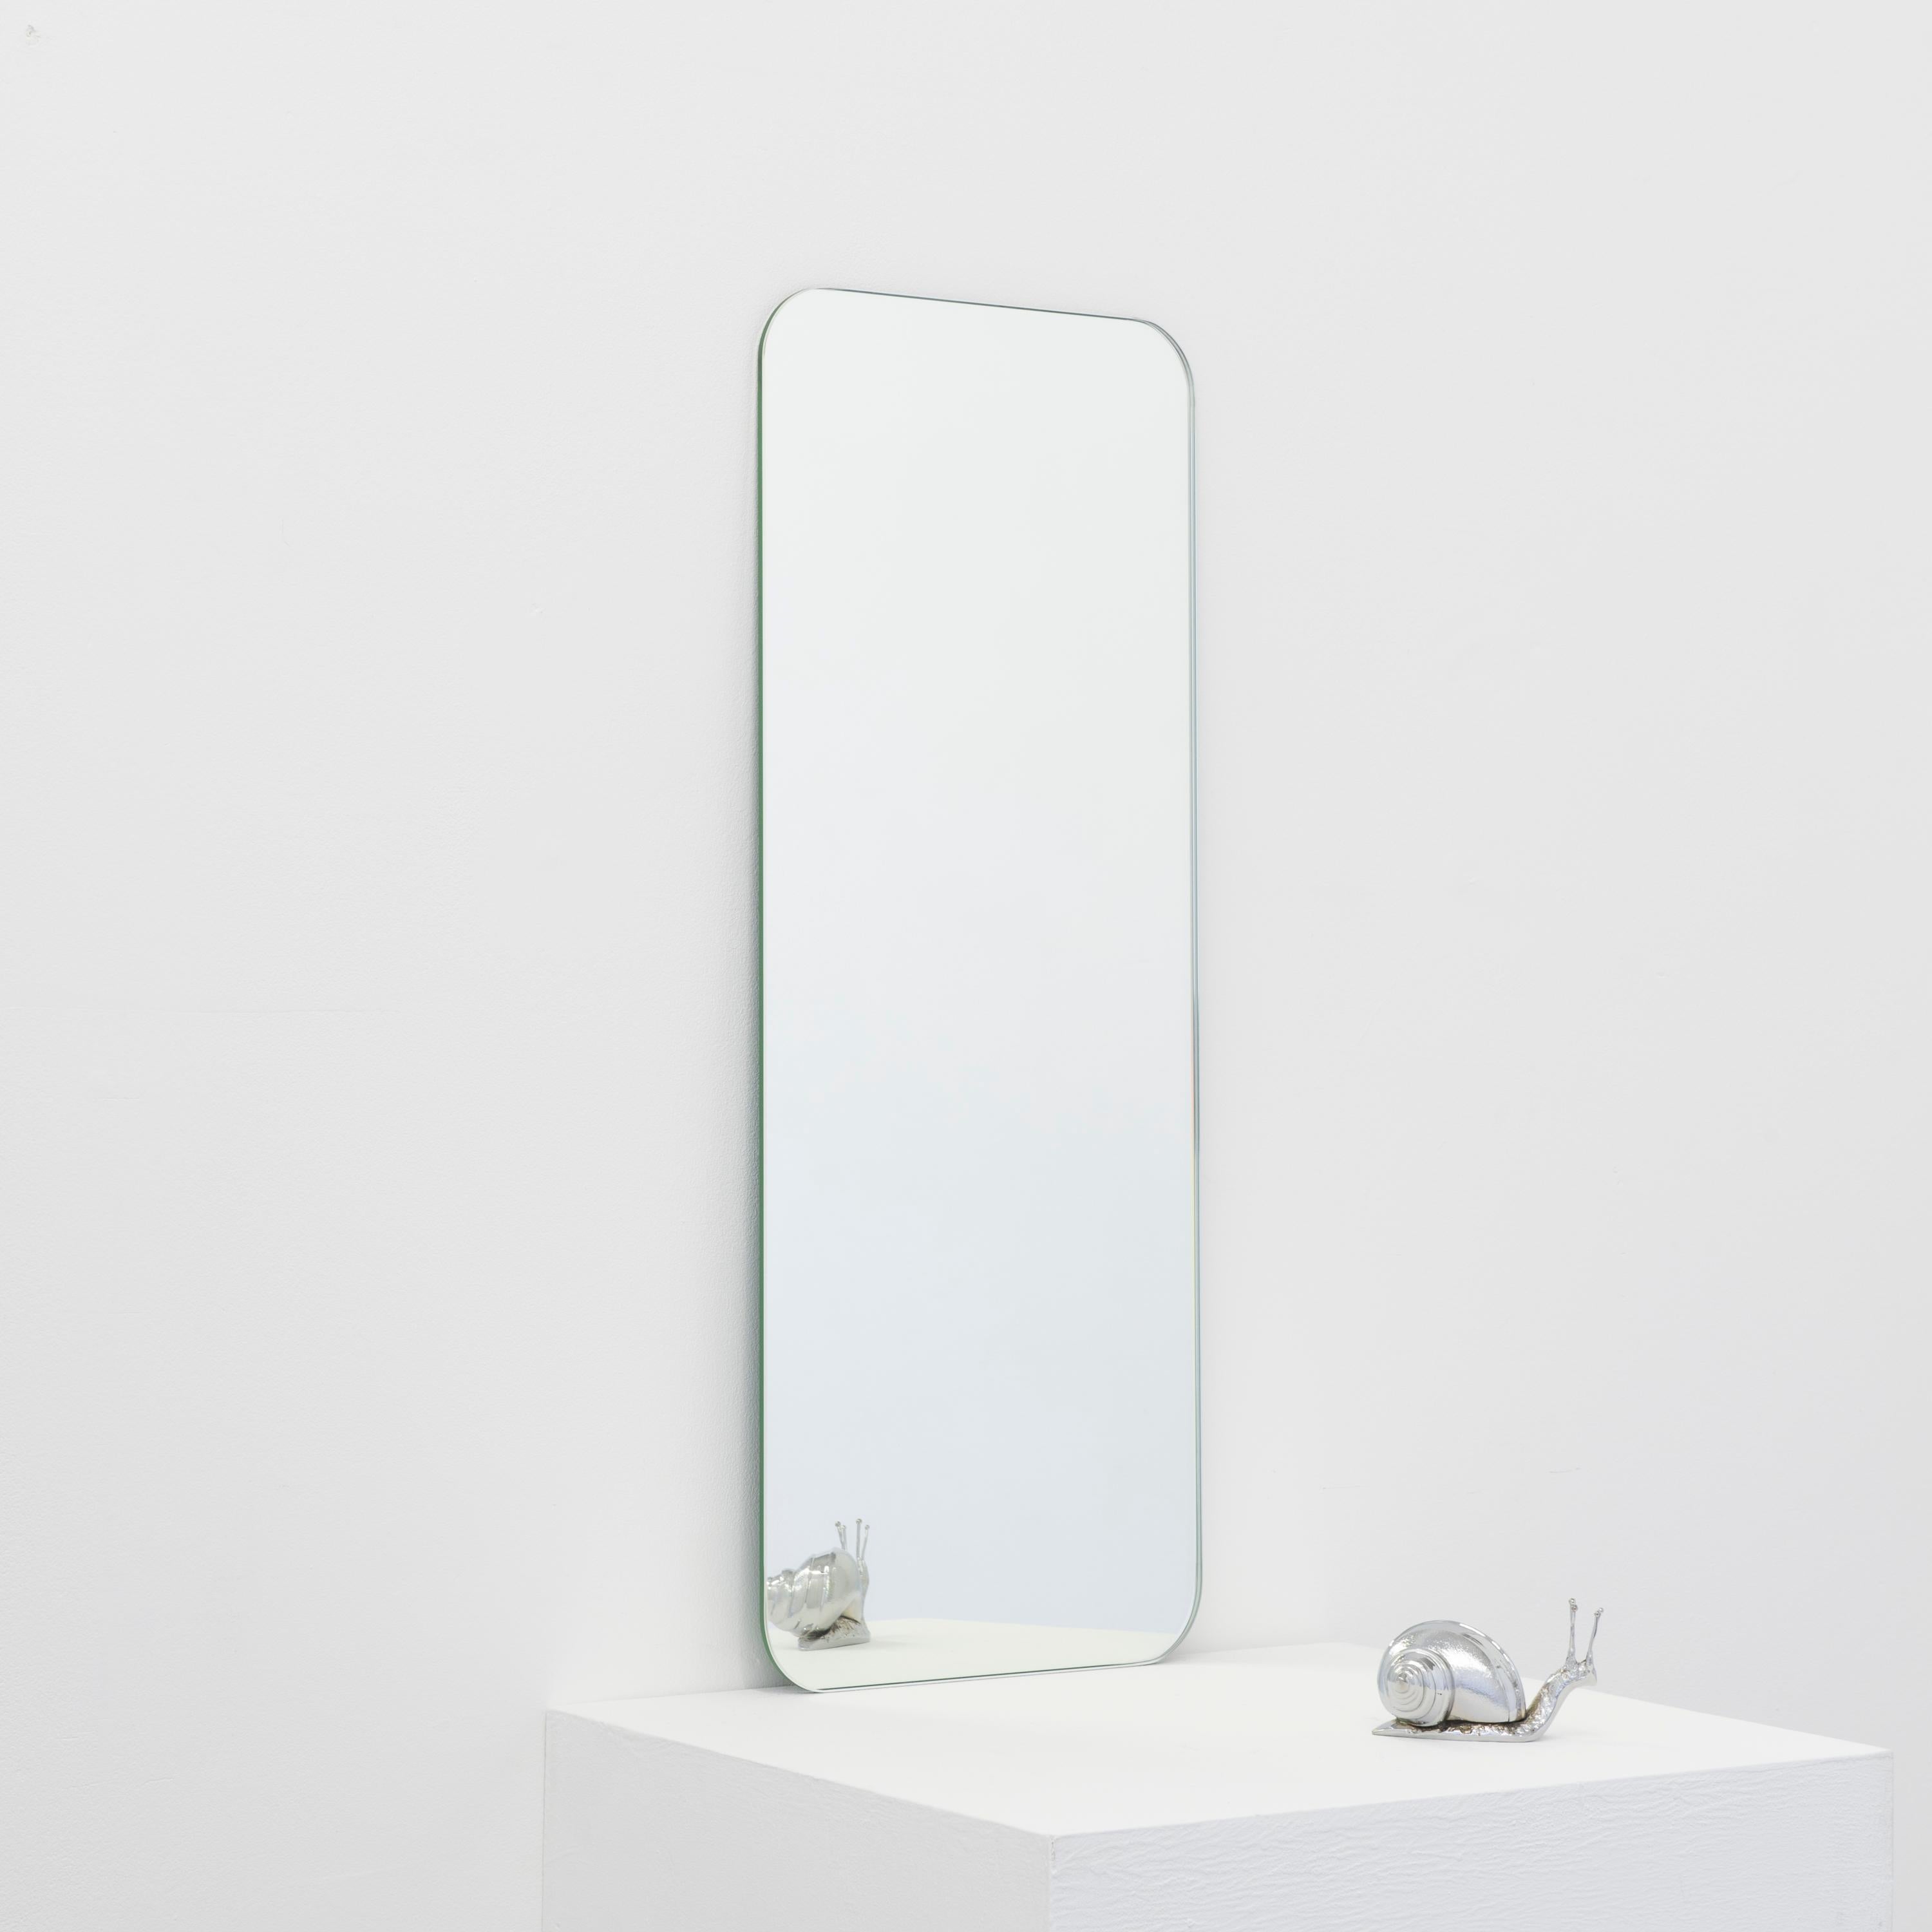 Minimalist Quadris Rectangular Contemporary Frameless Mirror with Floating Effect, Large For Sale